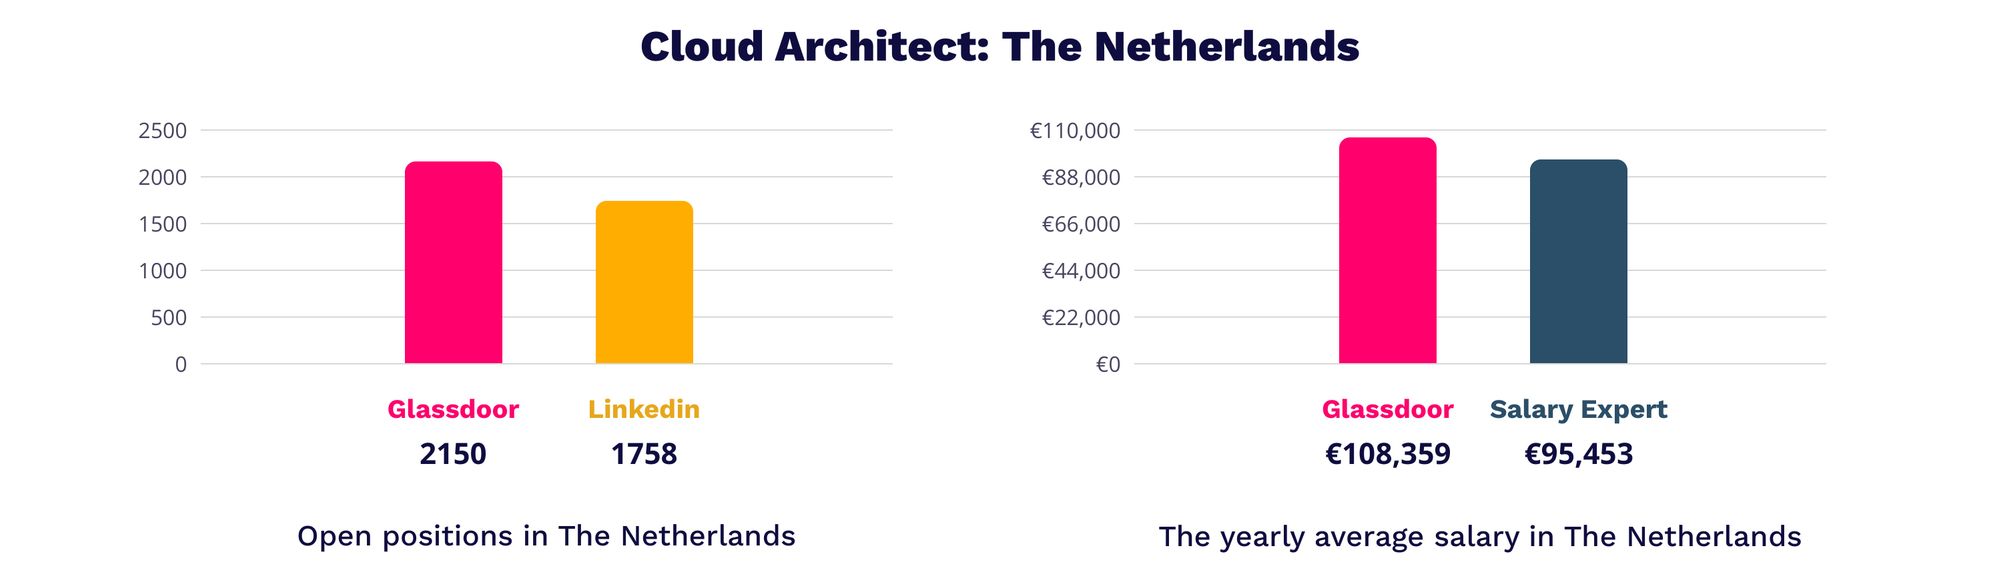 Cloud architect salary - IT Jobs in The Netherlands | MagicHire.co